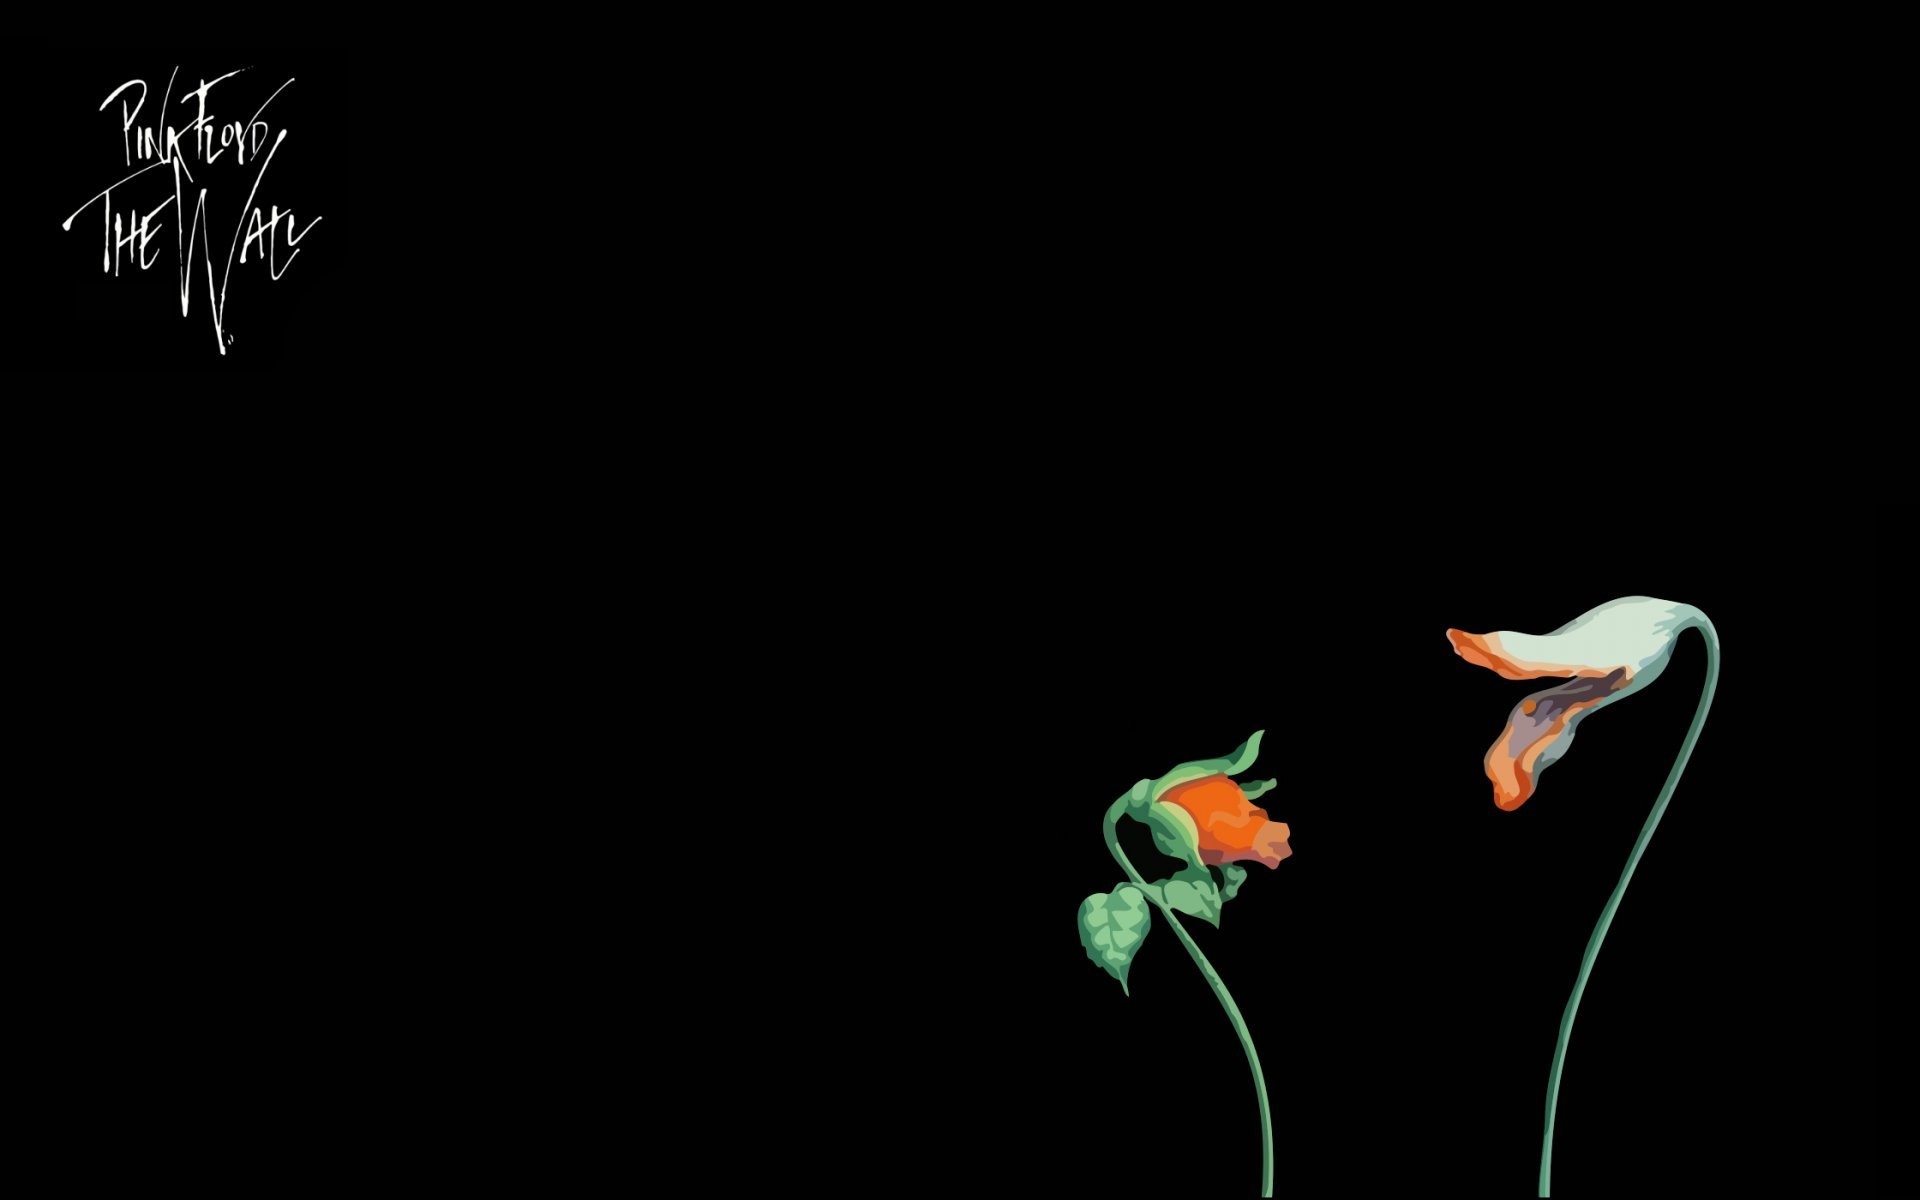 1920x1200 pink floyd the wall empty spaces movie the flowers elclon music minimalism